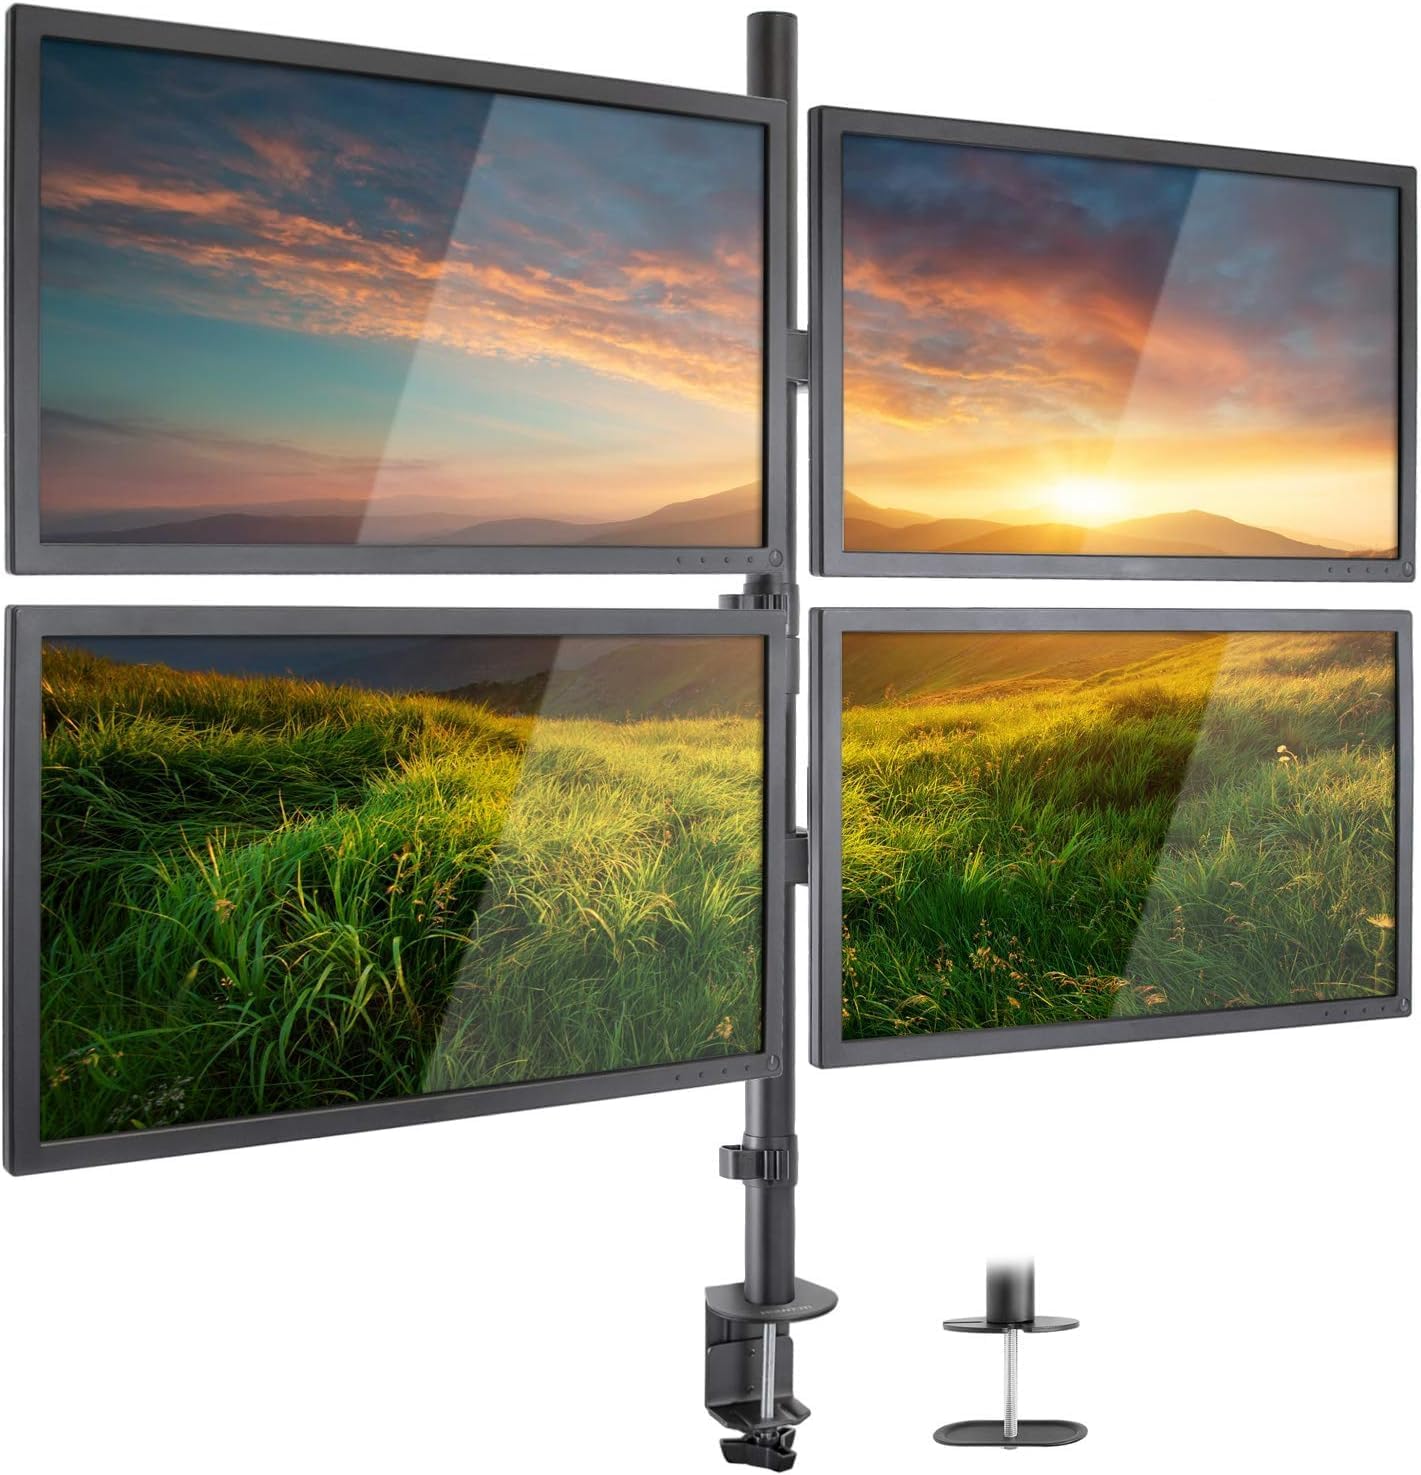 ELTERAZONE 4 Monitor Desk Mount, Adjustable Monitor Stand, Heavy Duty Fully Hight Angle Adjustable Stand With Clamp, Fits Single PC Digital Screens 13 to 32 inches (13-32 INCH (05), BLACK)